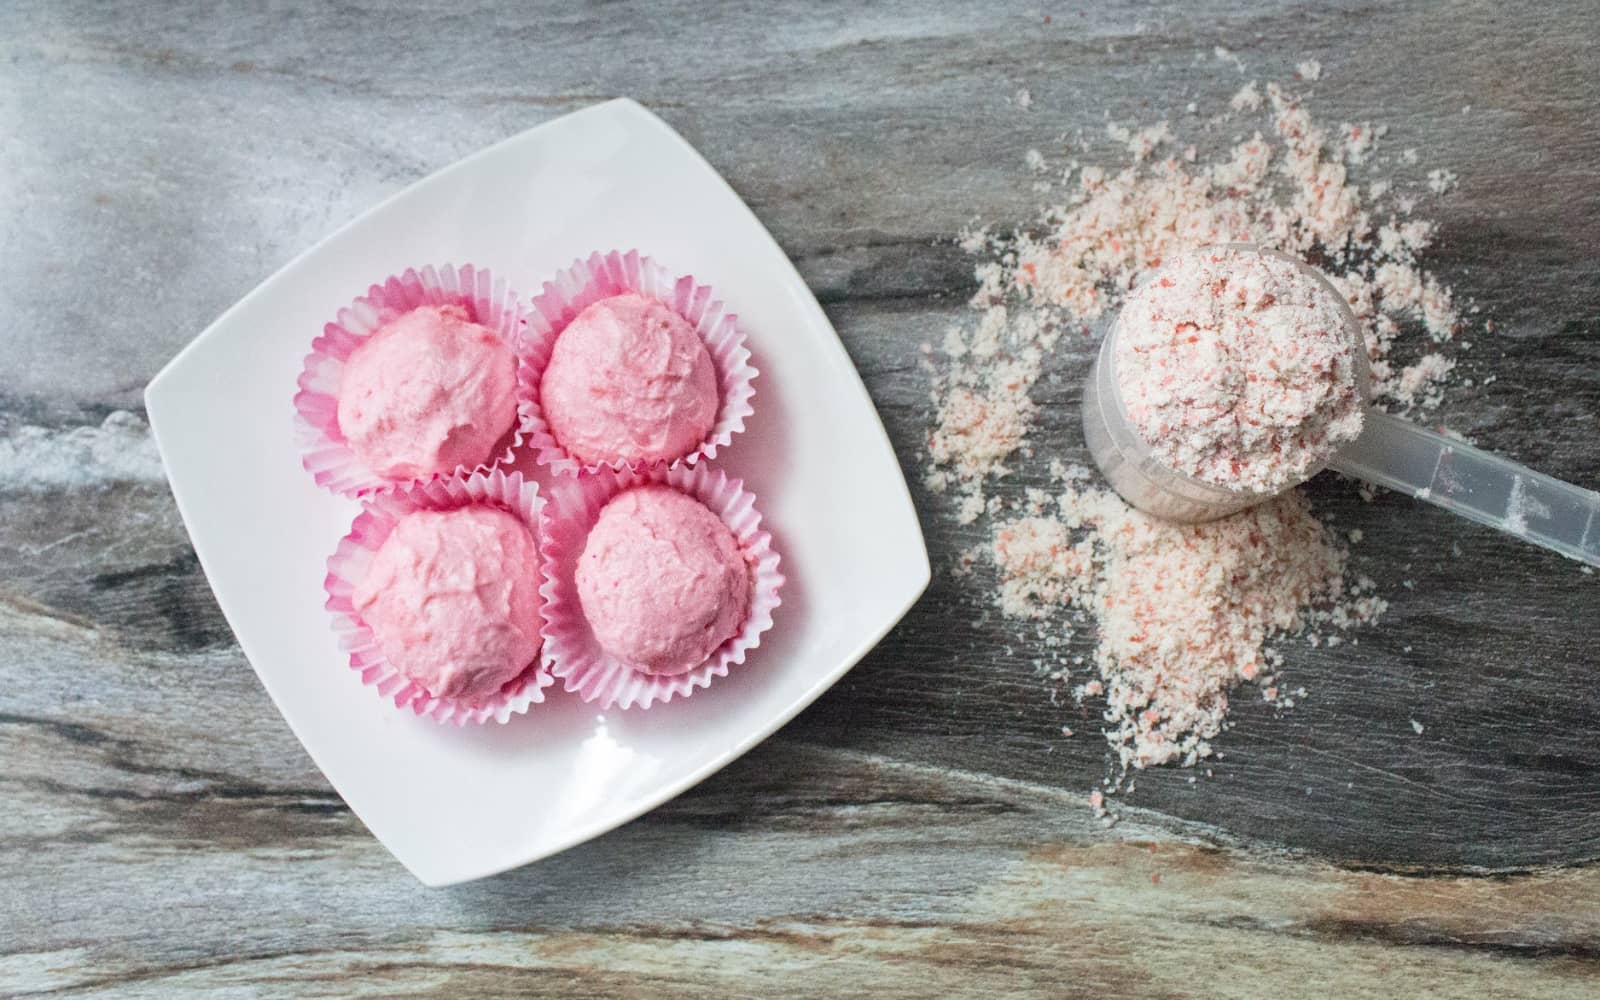 Keto Strawberry Cream Fat Bombs - Nutracelle